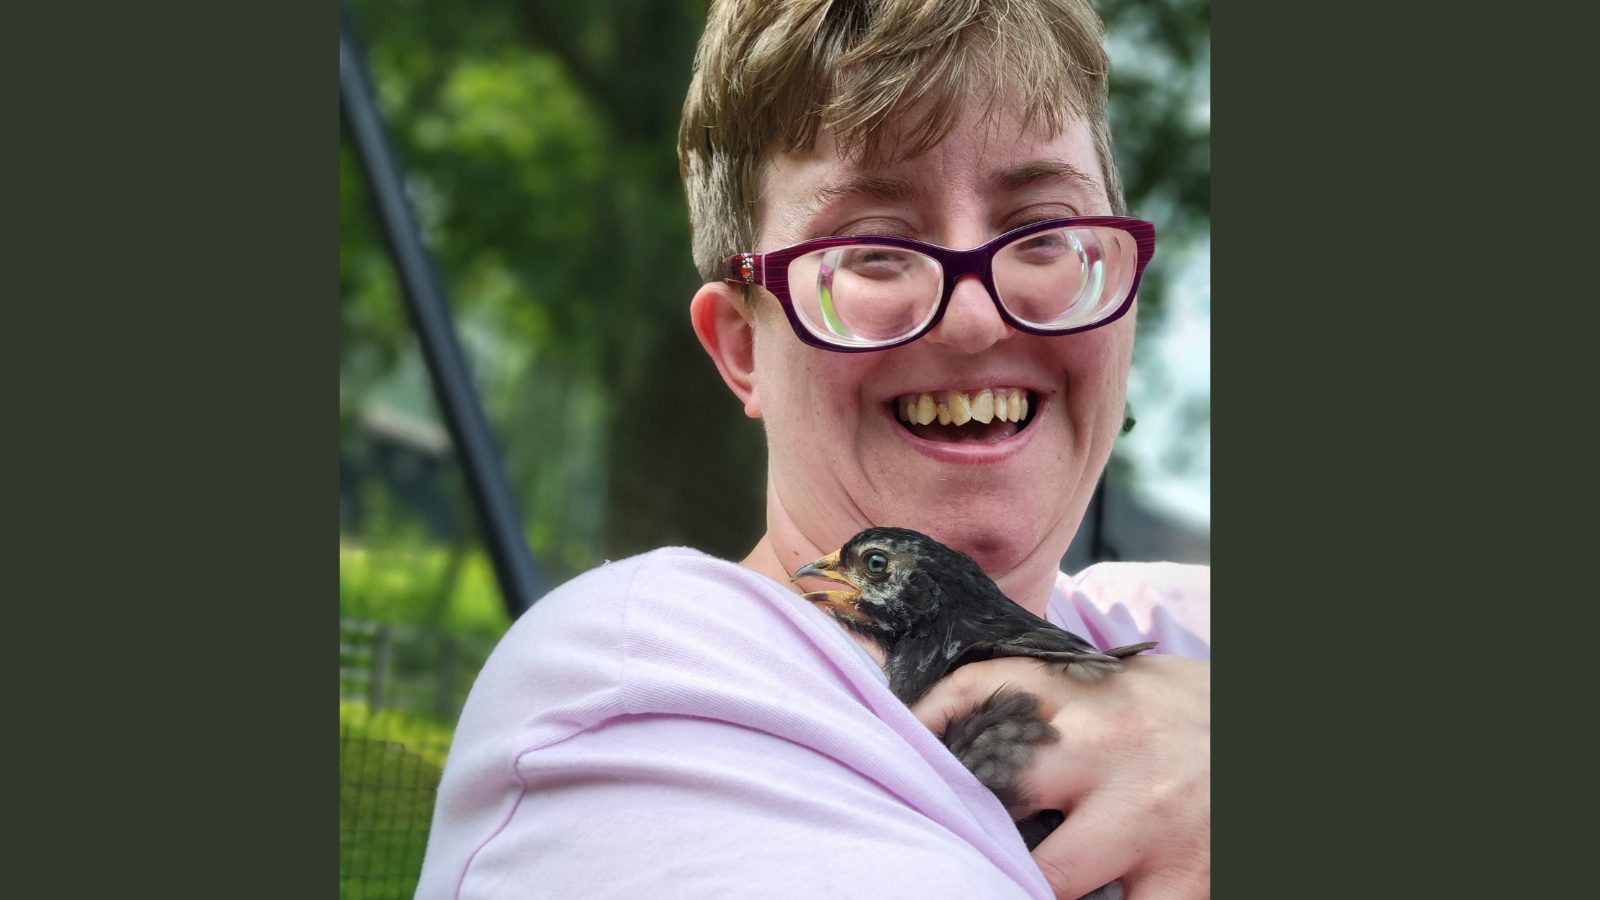 A women in short hair, red glasses and lavender shirt smiles as she holds a chicken that is a few weeks old.